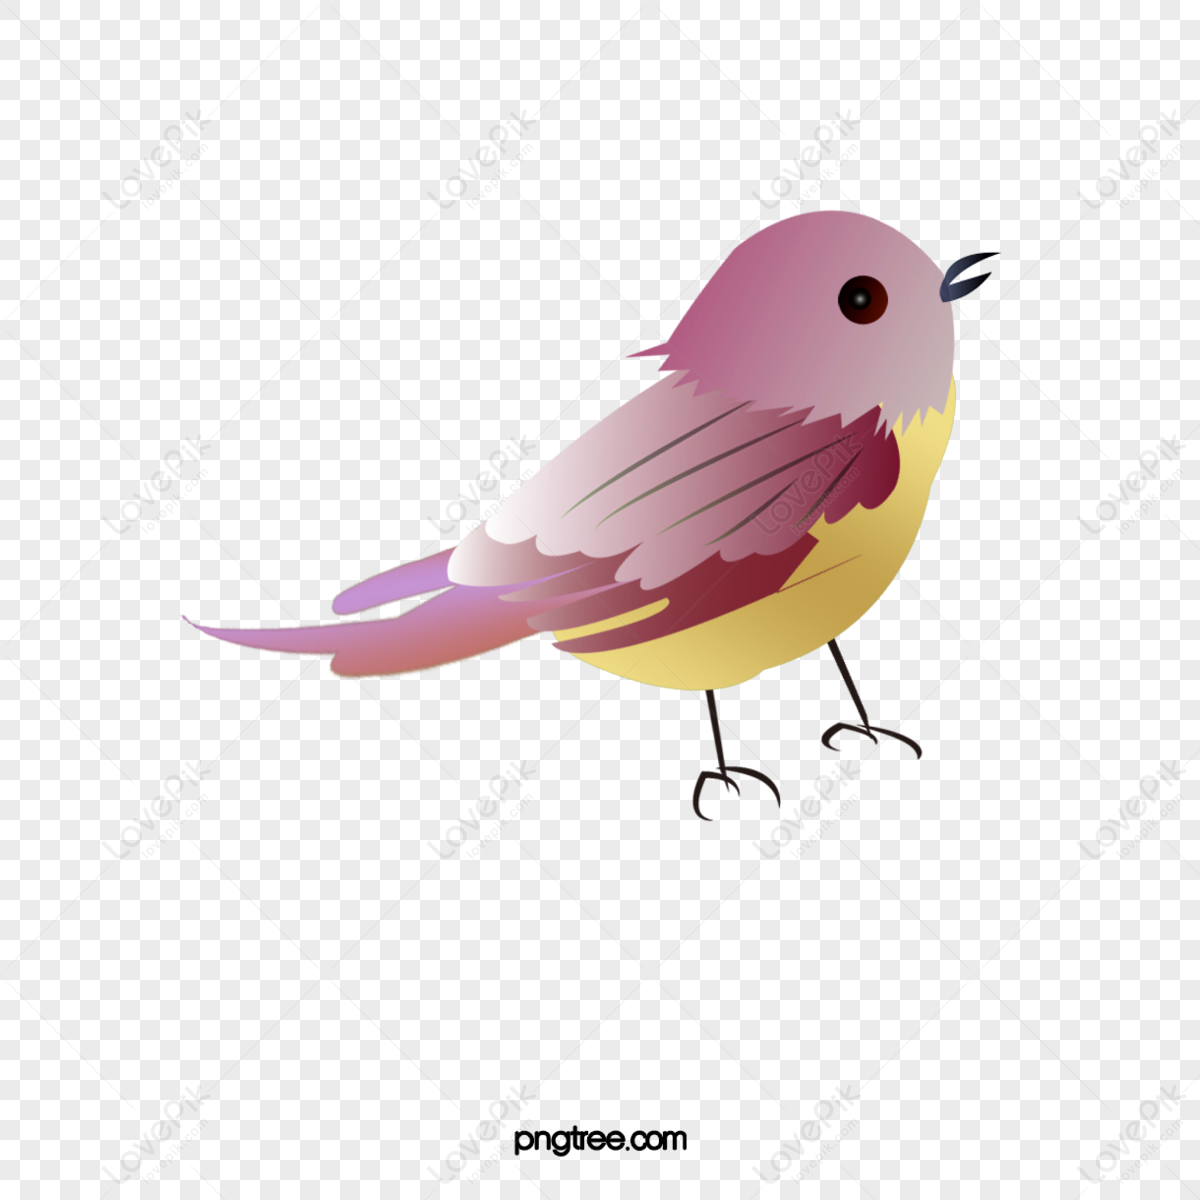 Budgie Birds Anime Merch & Gifts for Sale | Redbubble